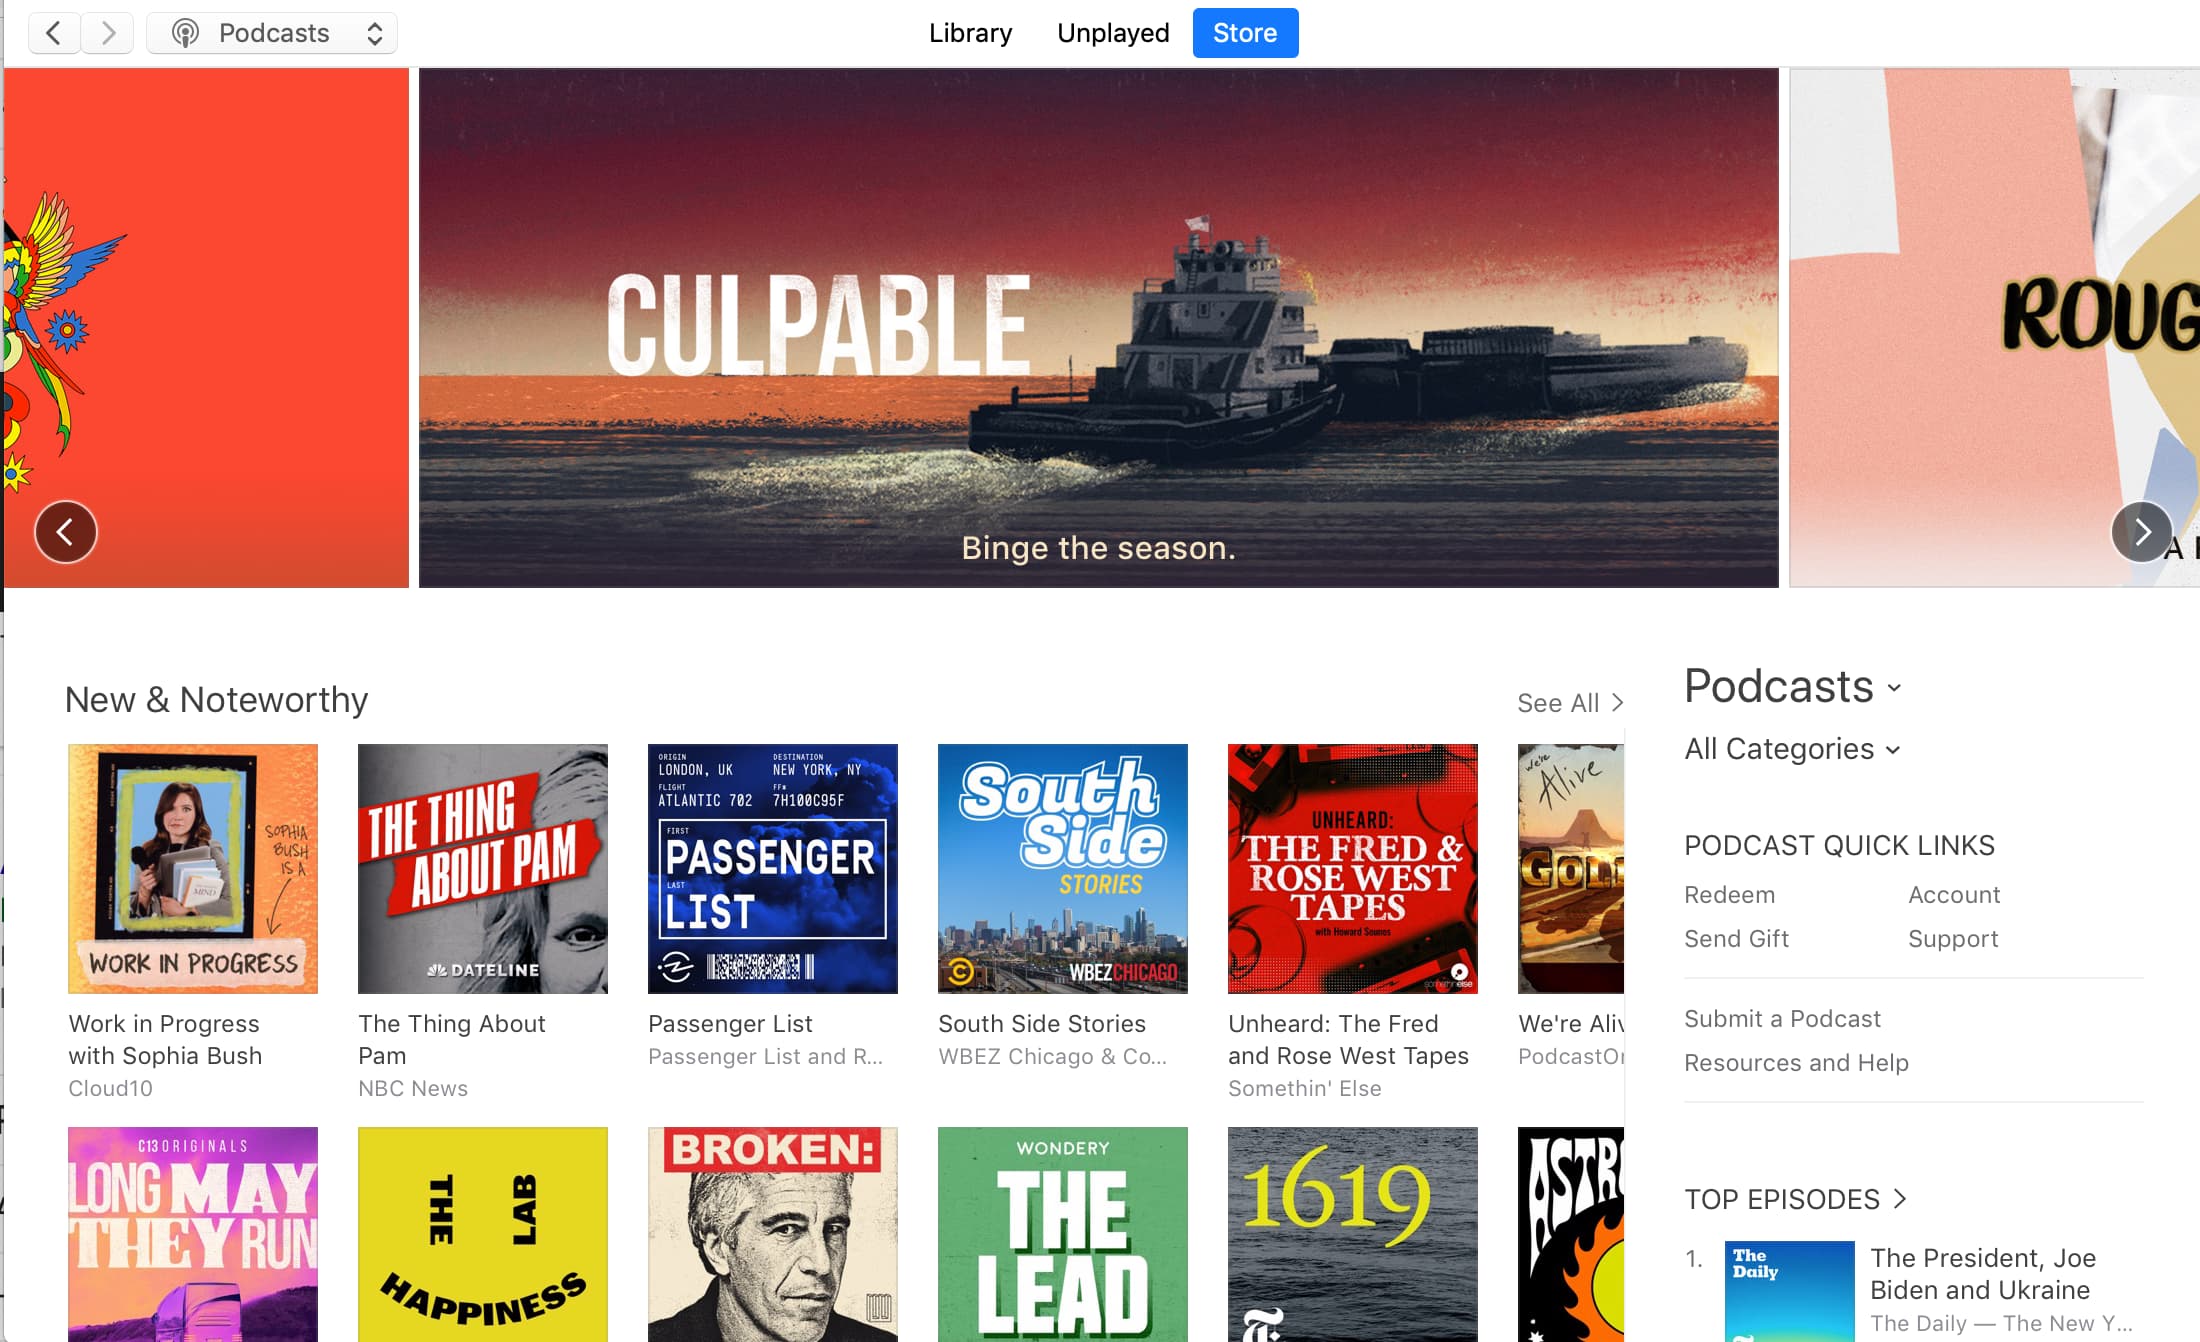 New and Noteworthy